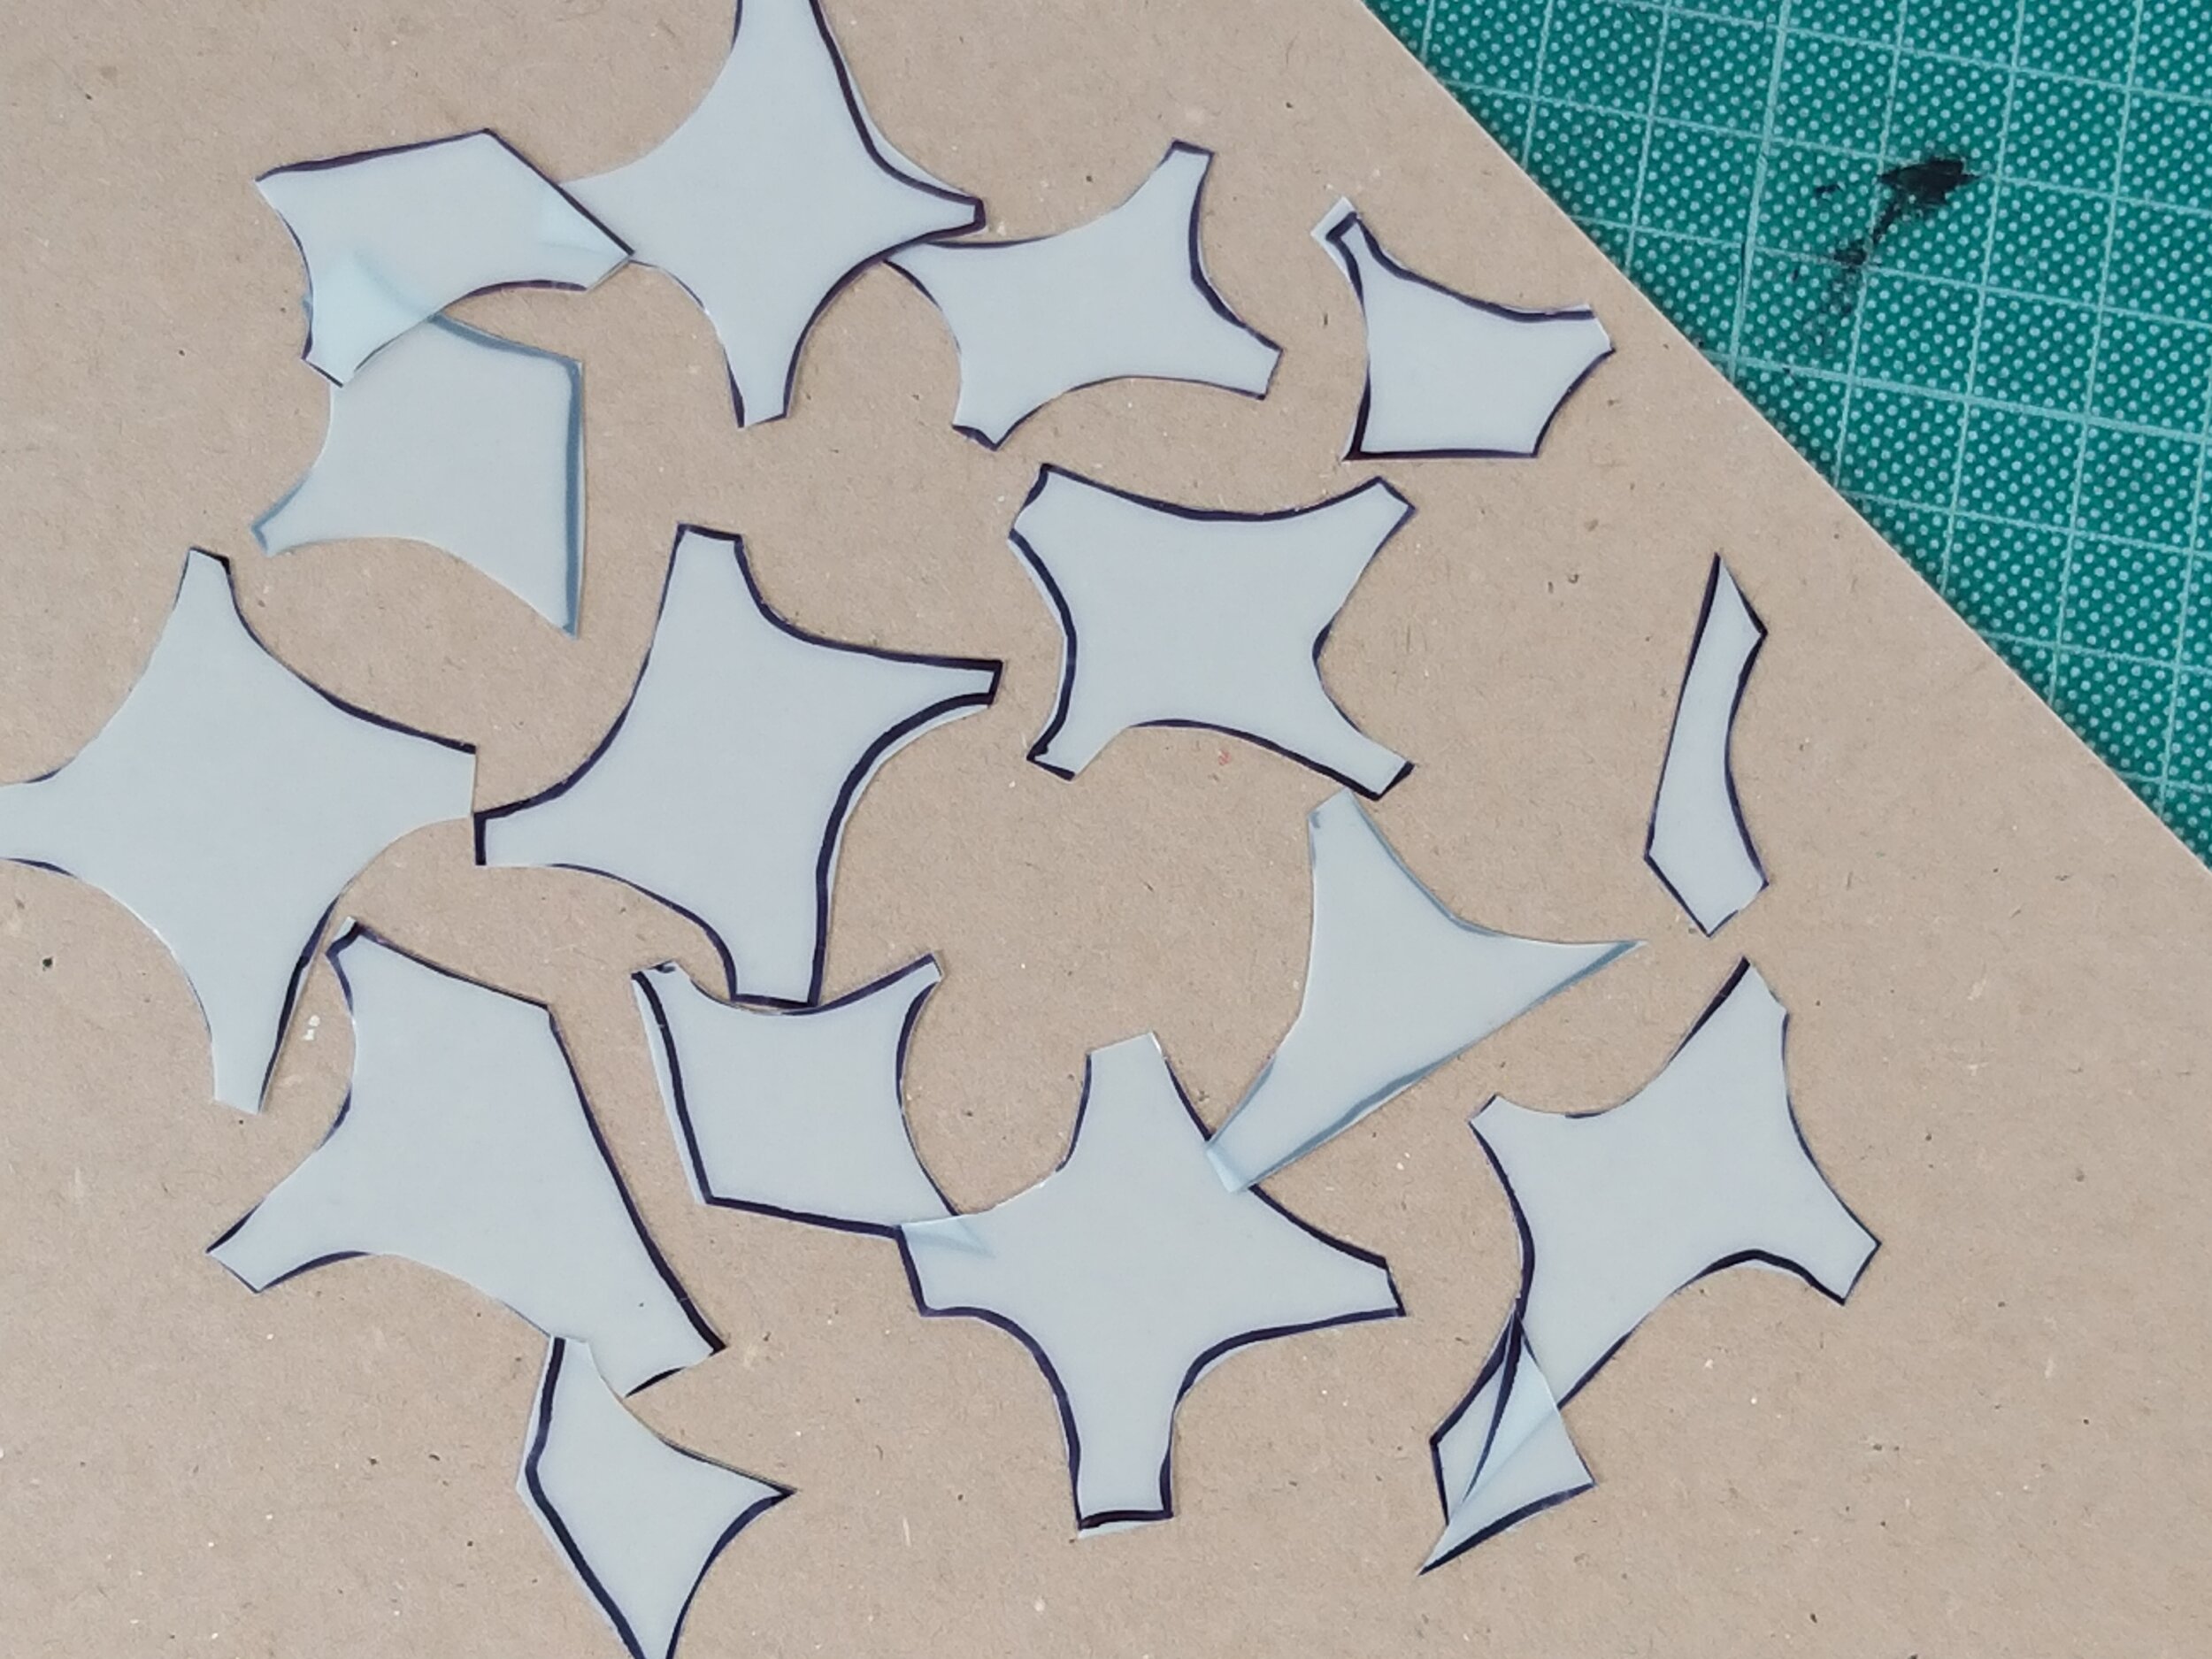  Save all off cuts and scraps from the stencil cutting to use for monoprinting effects in other designs.  